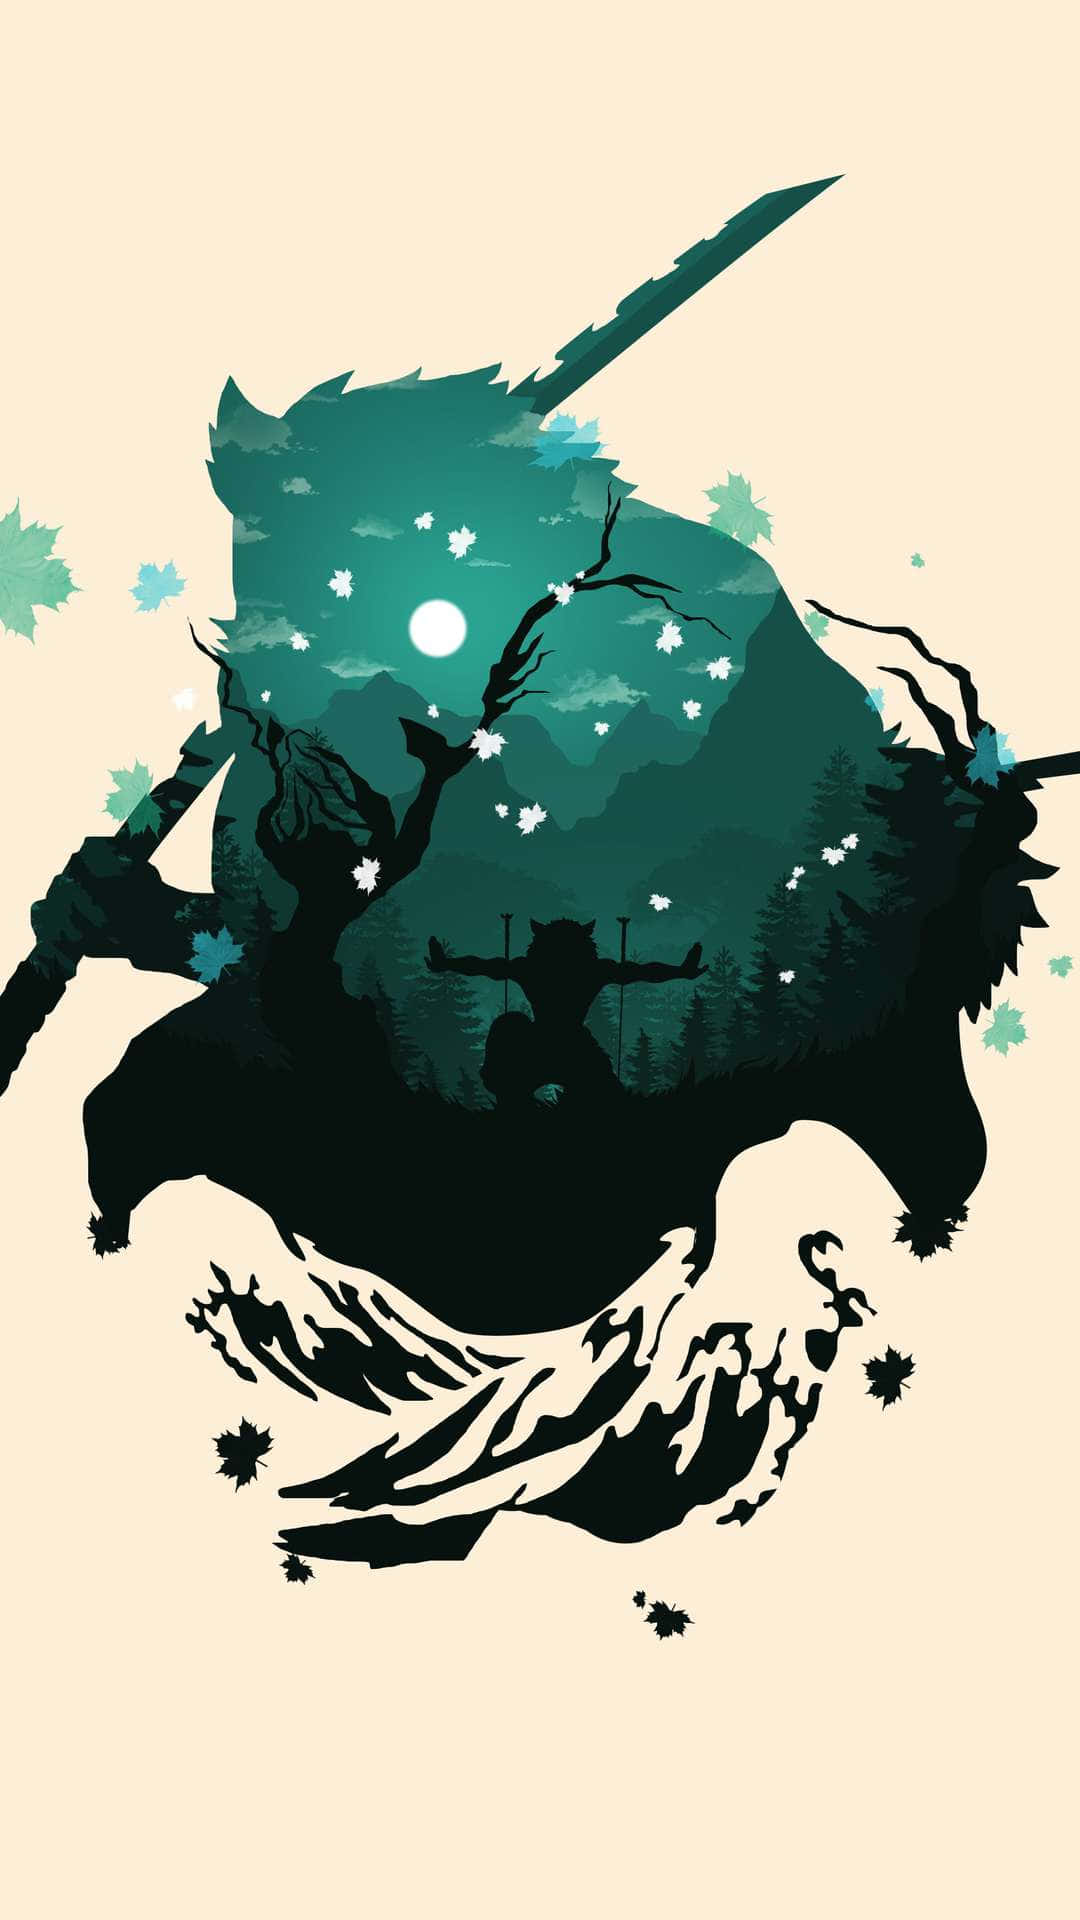 A Silhouette Of A Man With A Sword In The Water Wallpaper